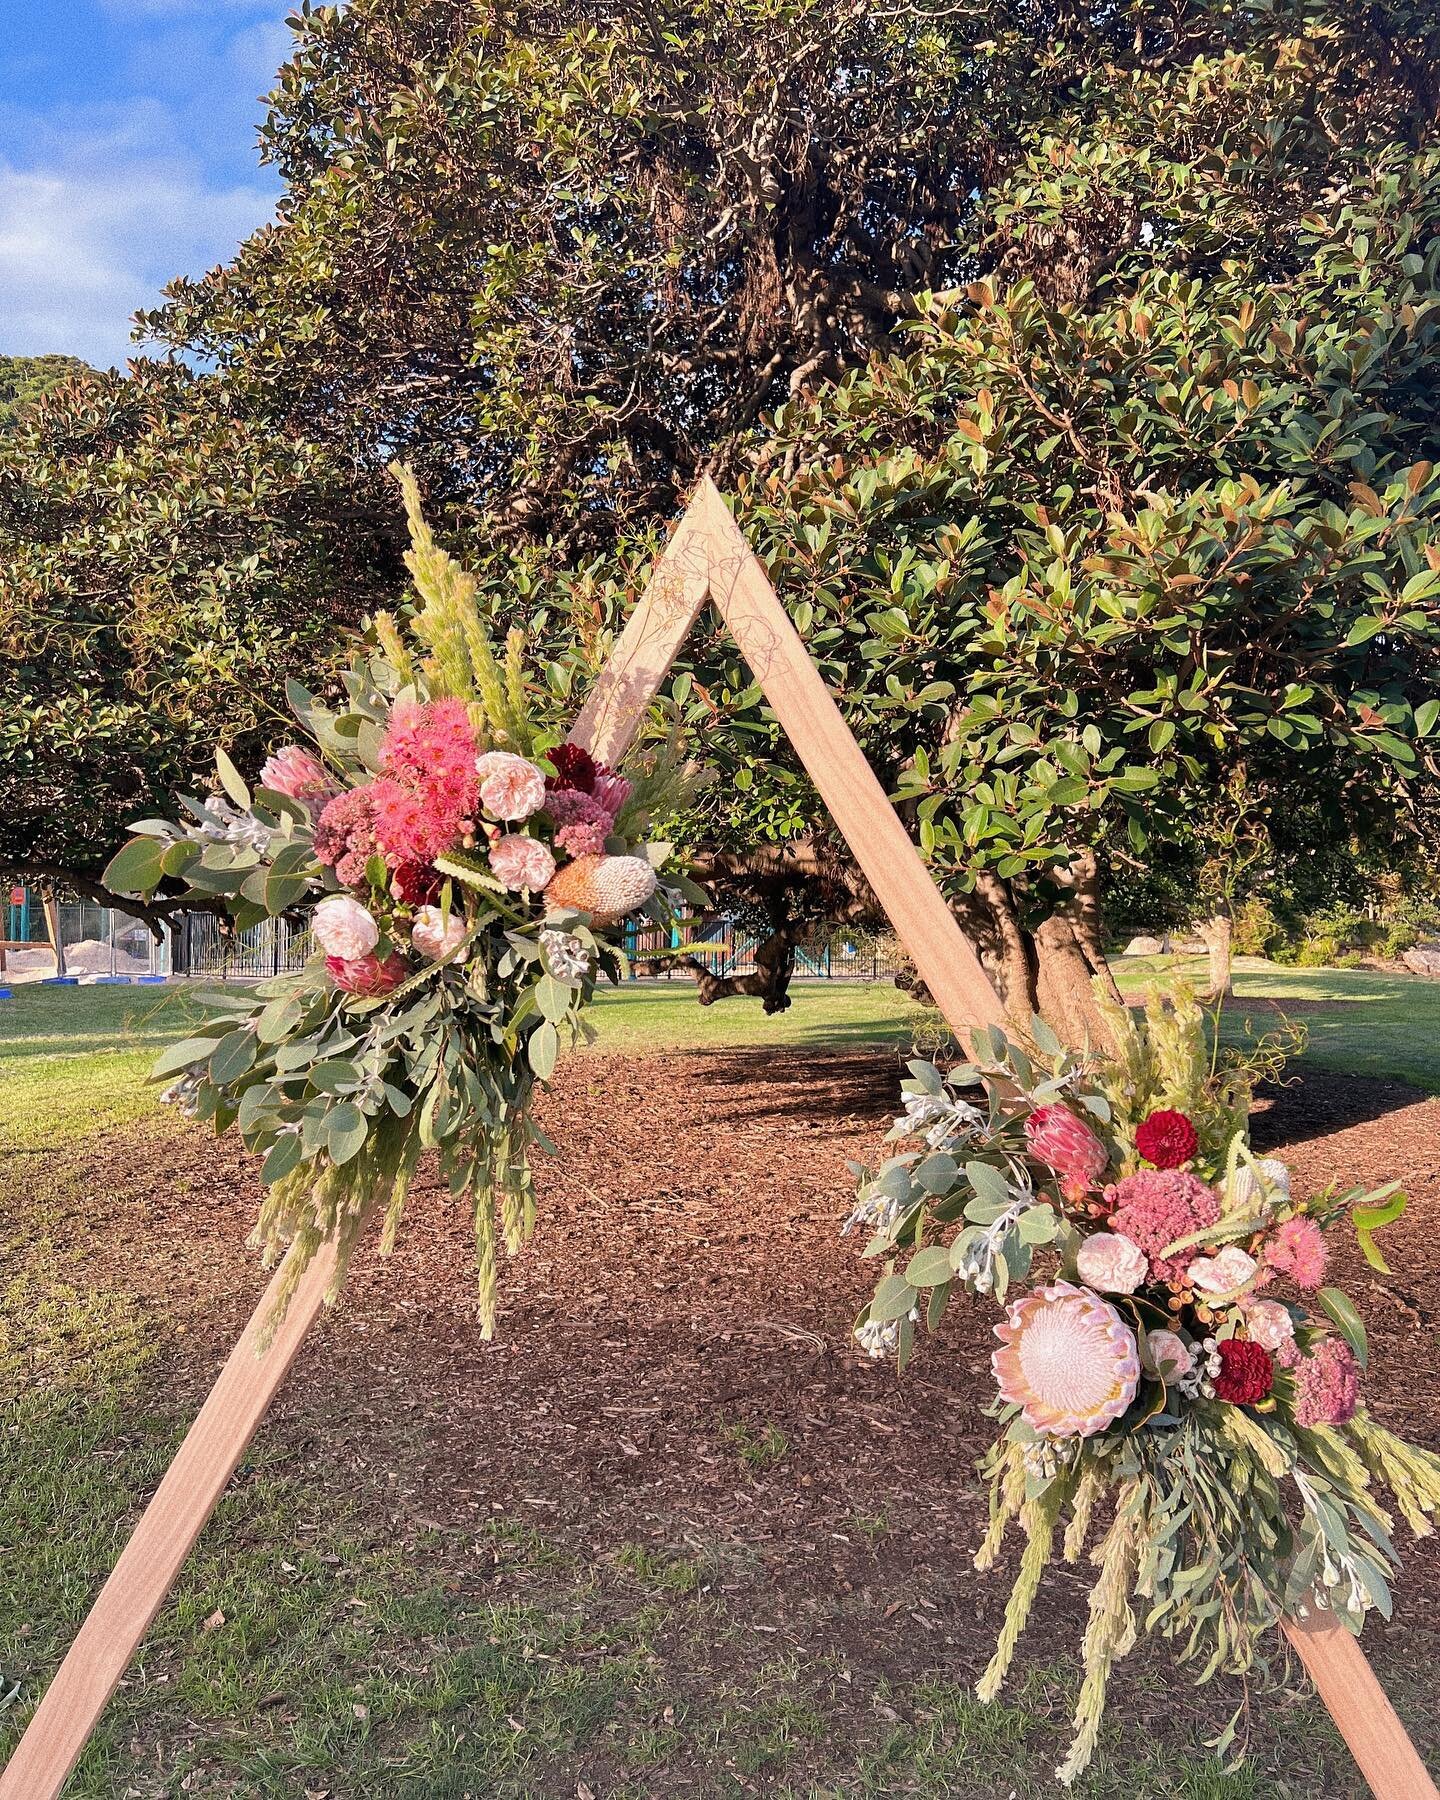 Arbour in the setting sun from yesterdays lovely wedding of Chloe and Sam 💛 
 
Australian Native flowers with additional local roses and dahlias with stunning proteas native to SA (grown in Aus ofcourse) 
 
Get in touch to plan your wedding today, a